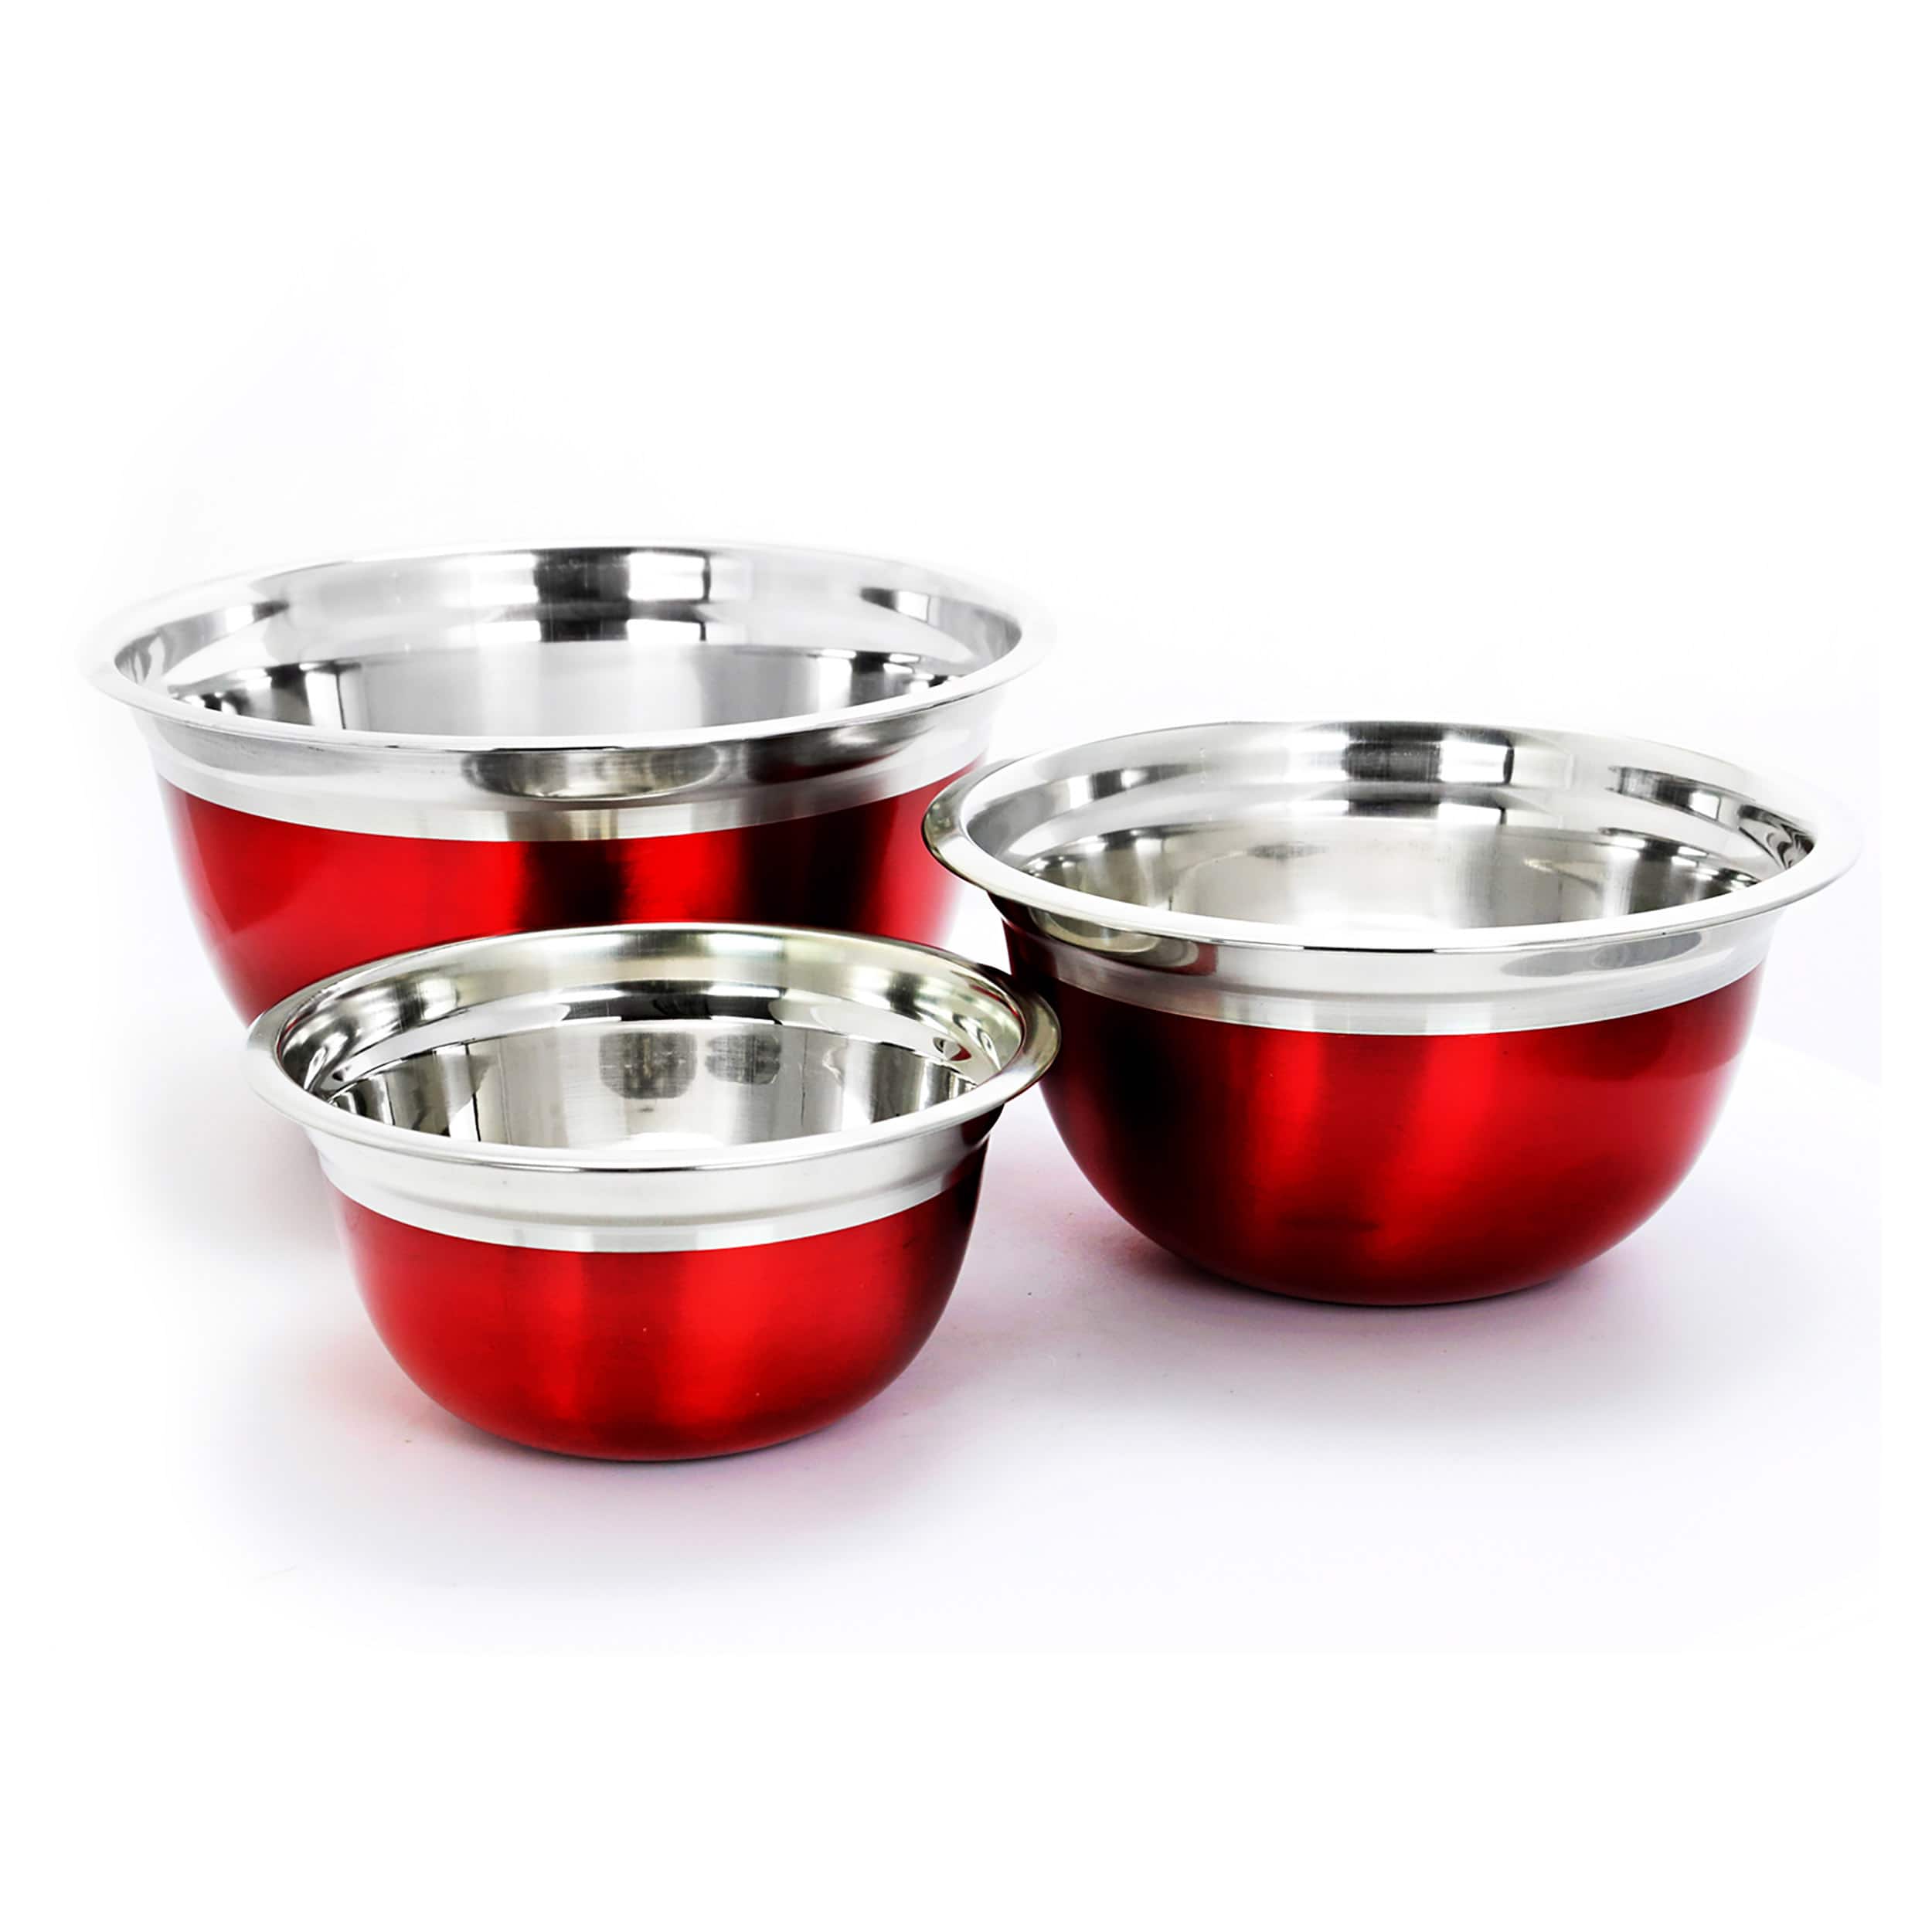 Oster Rosamond Red Stainless Steel Mixing Bowl Set | Michaels